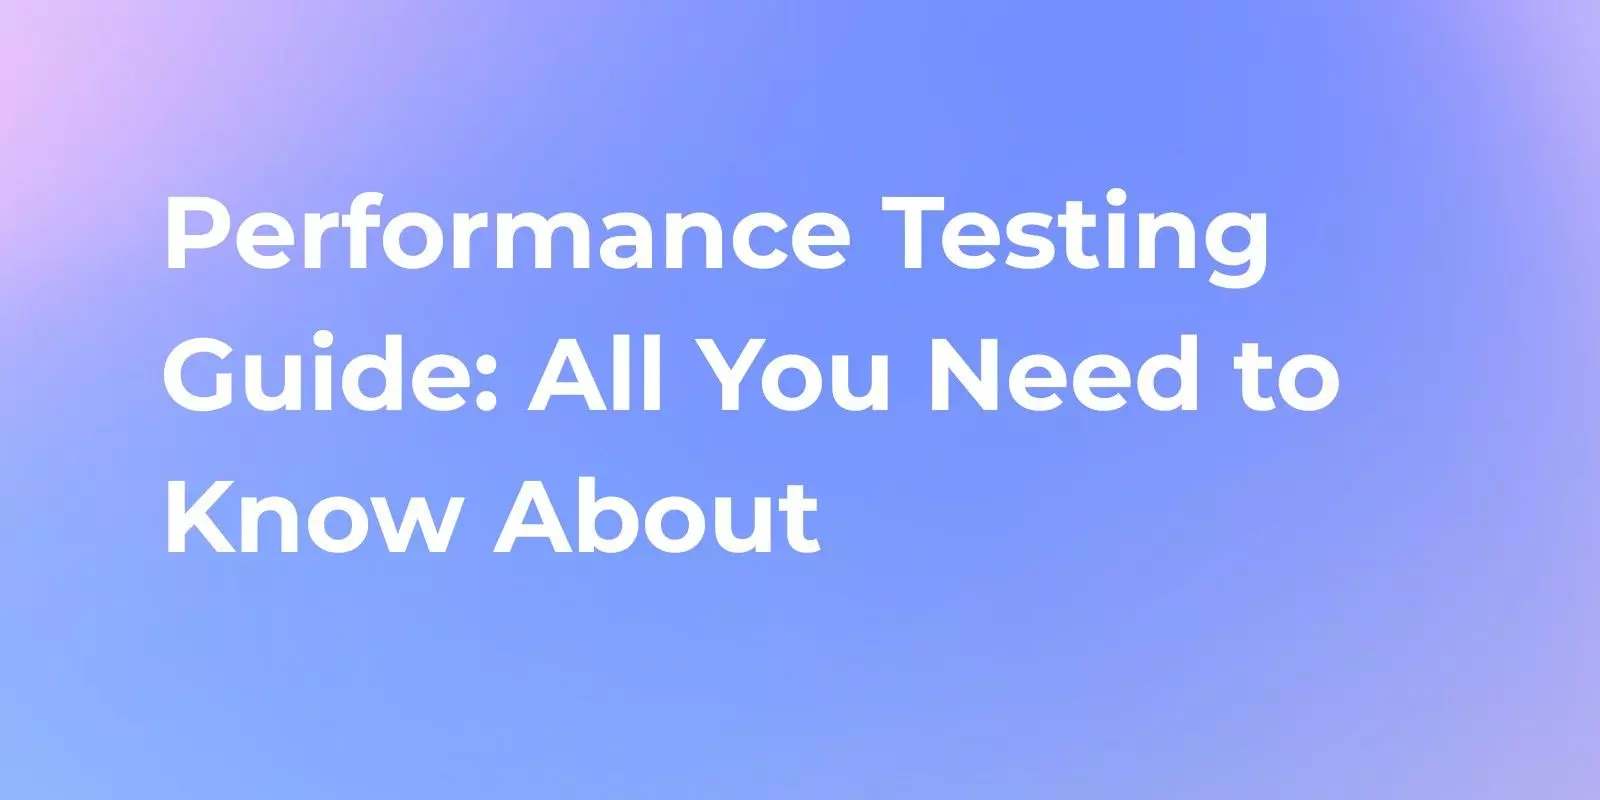 5 Benefits of Continuous Performance Testing